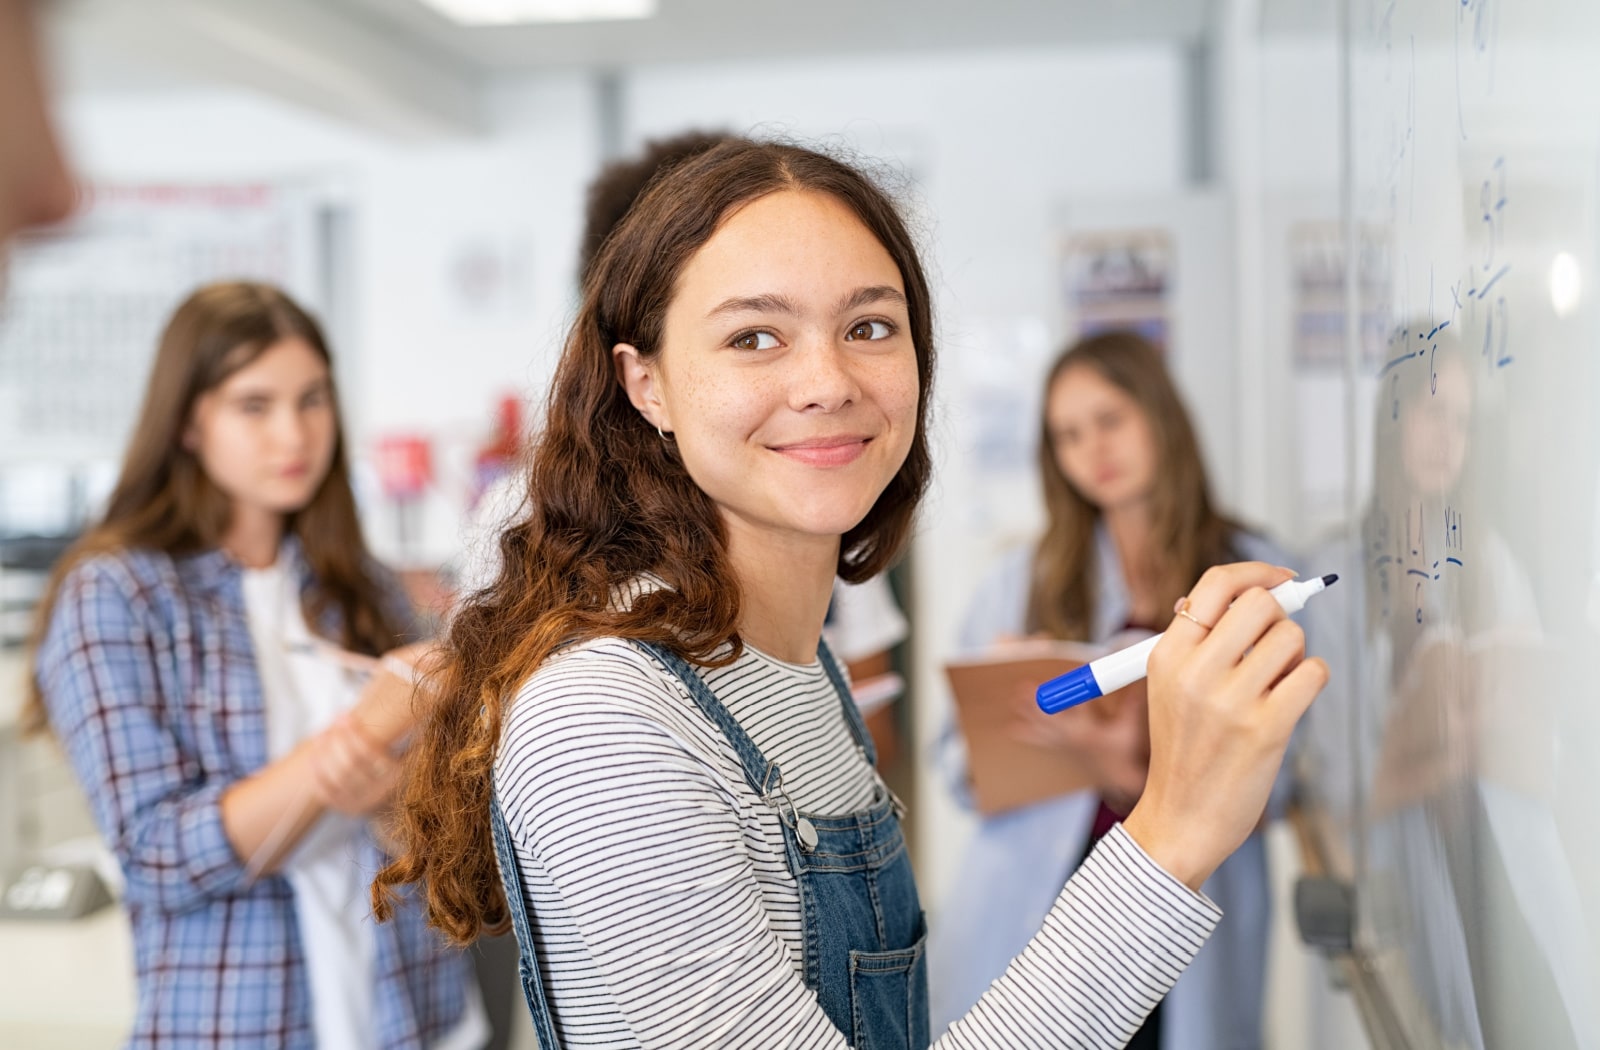 A teenage girl smiling back at someone while she is writing on a dry erase board in a class room